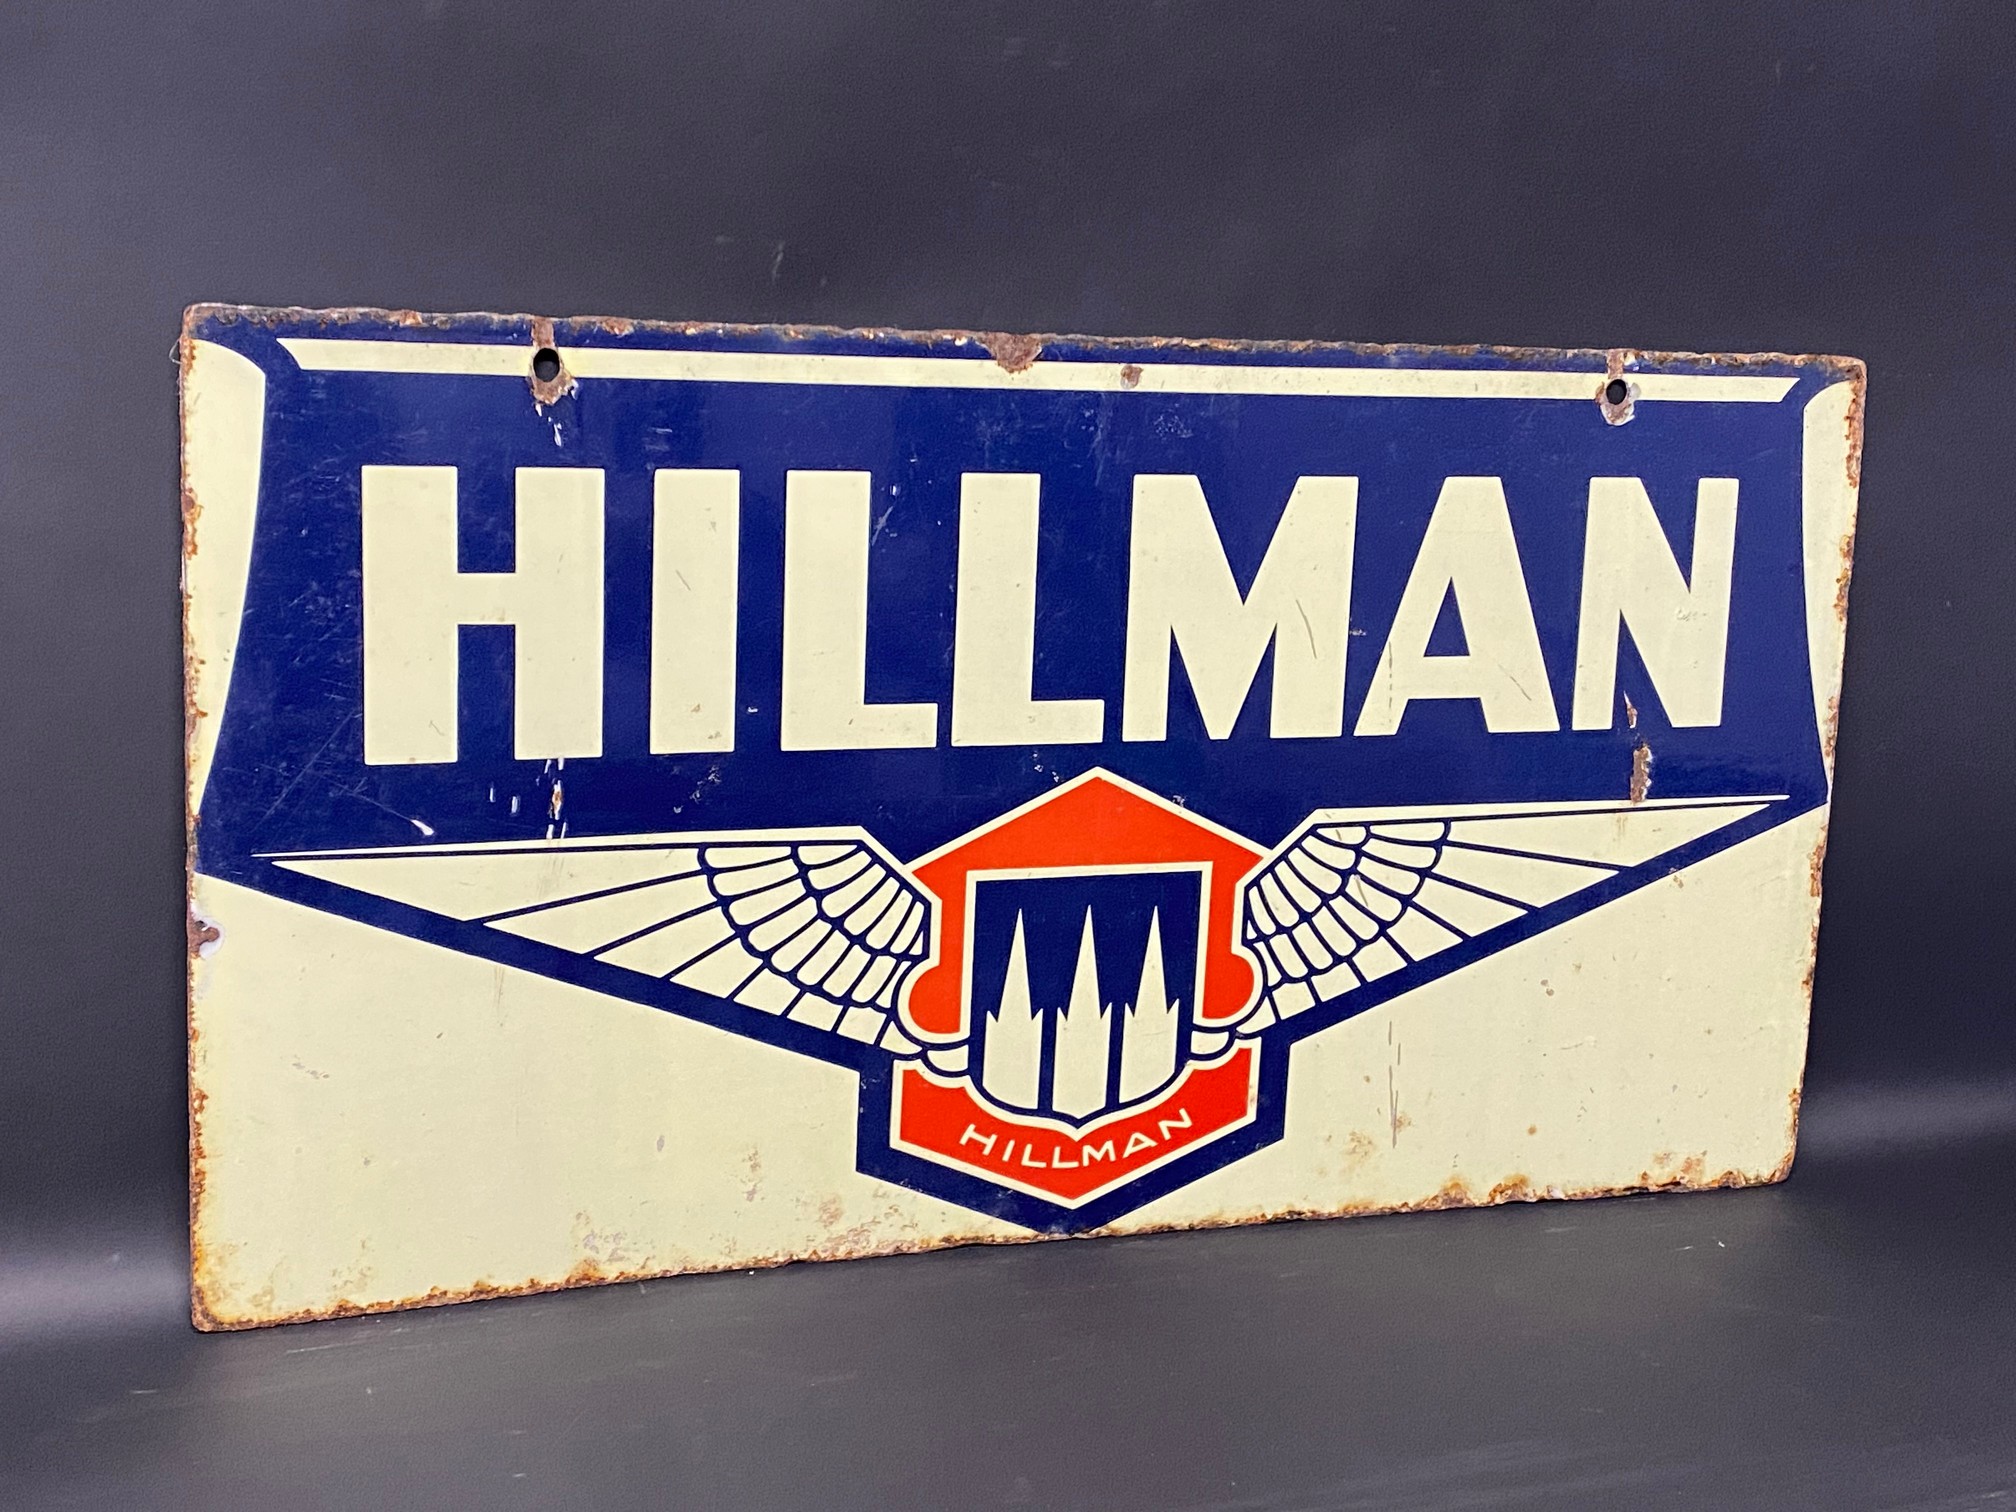 A Hillman rectangular double sided enamel sign by Franco, 28 x 15".